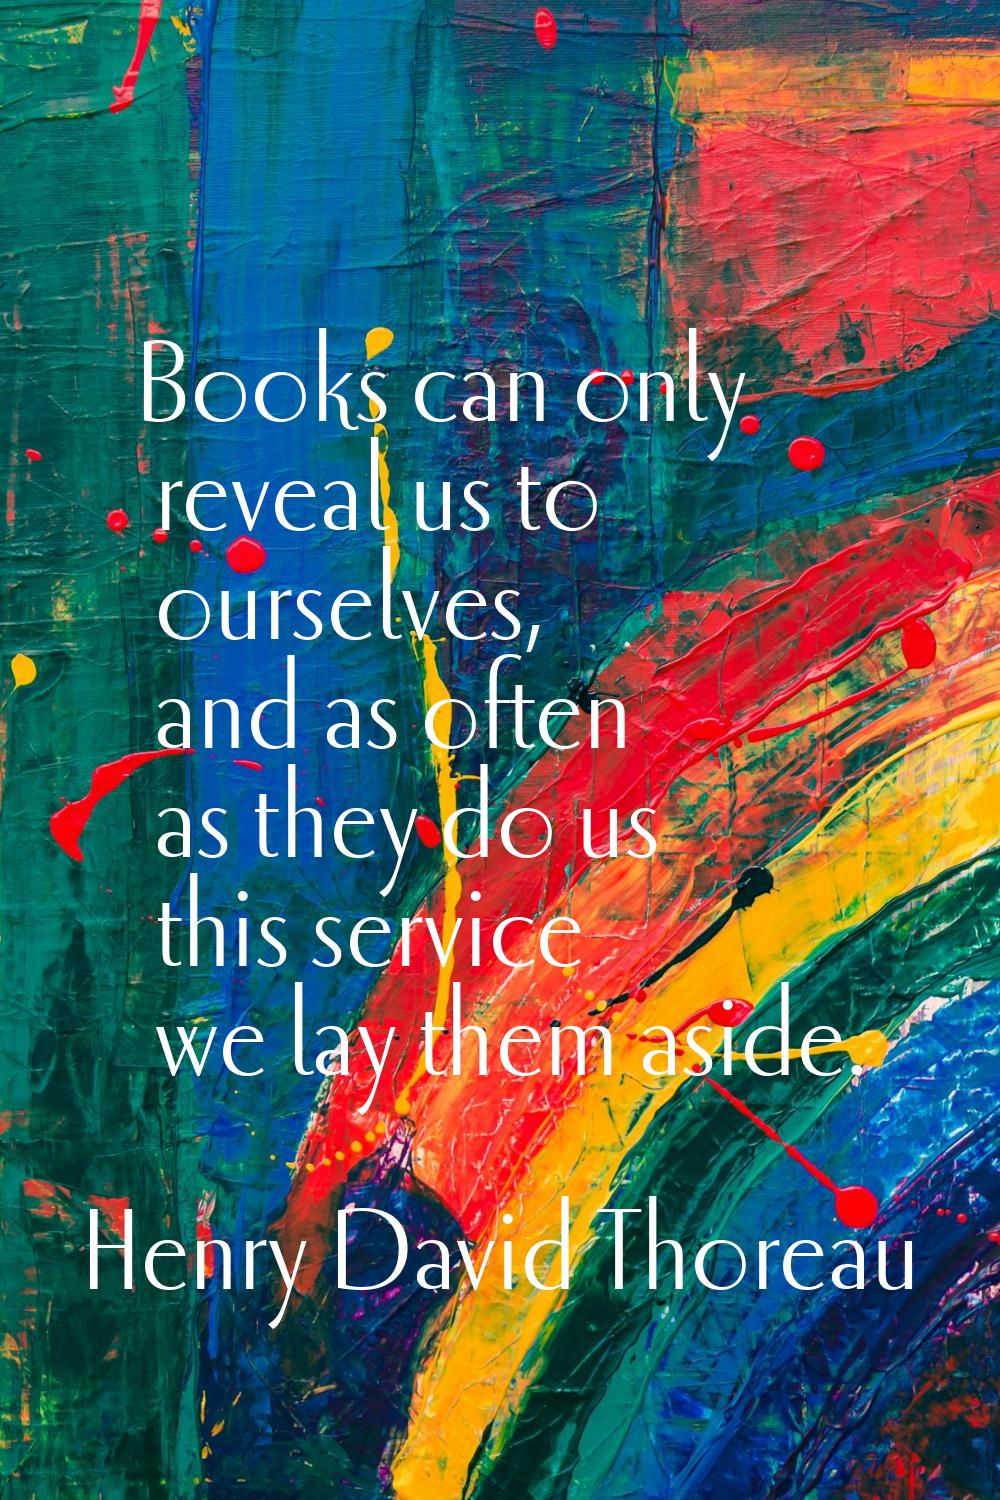 Books can only reveal us to ourselves, and as often as they do us this service we lay them aside.